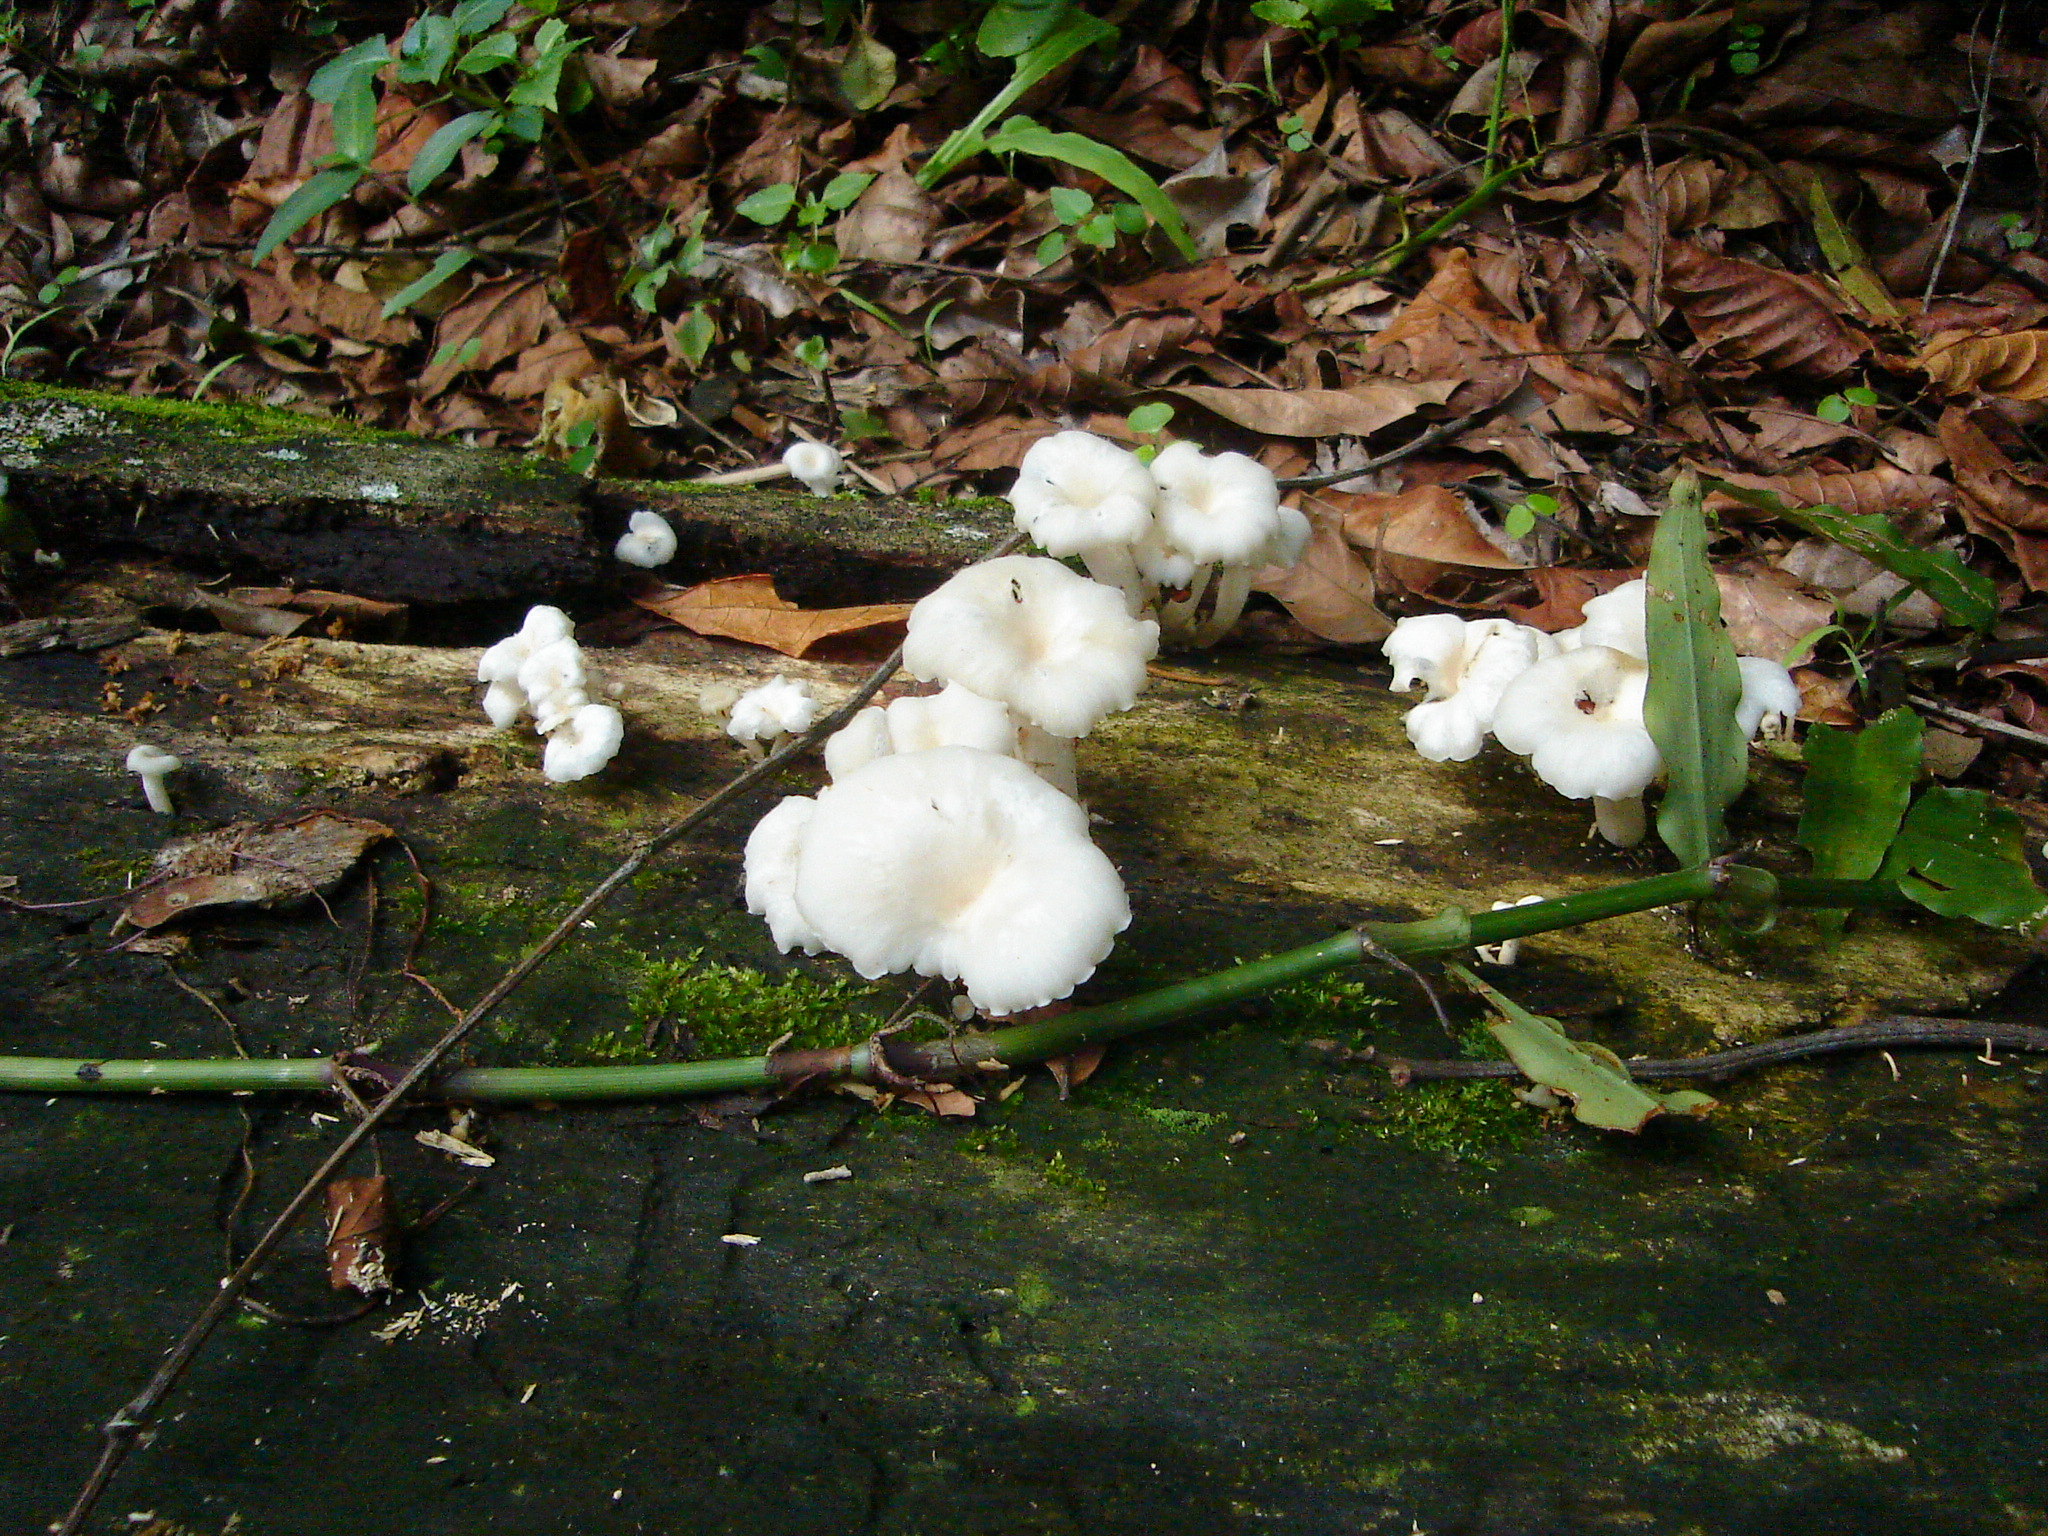 poows jungle forest mushroom fungus toadstool white growing